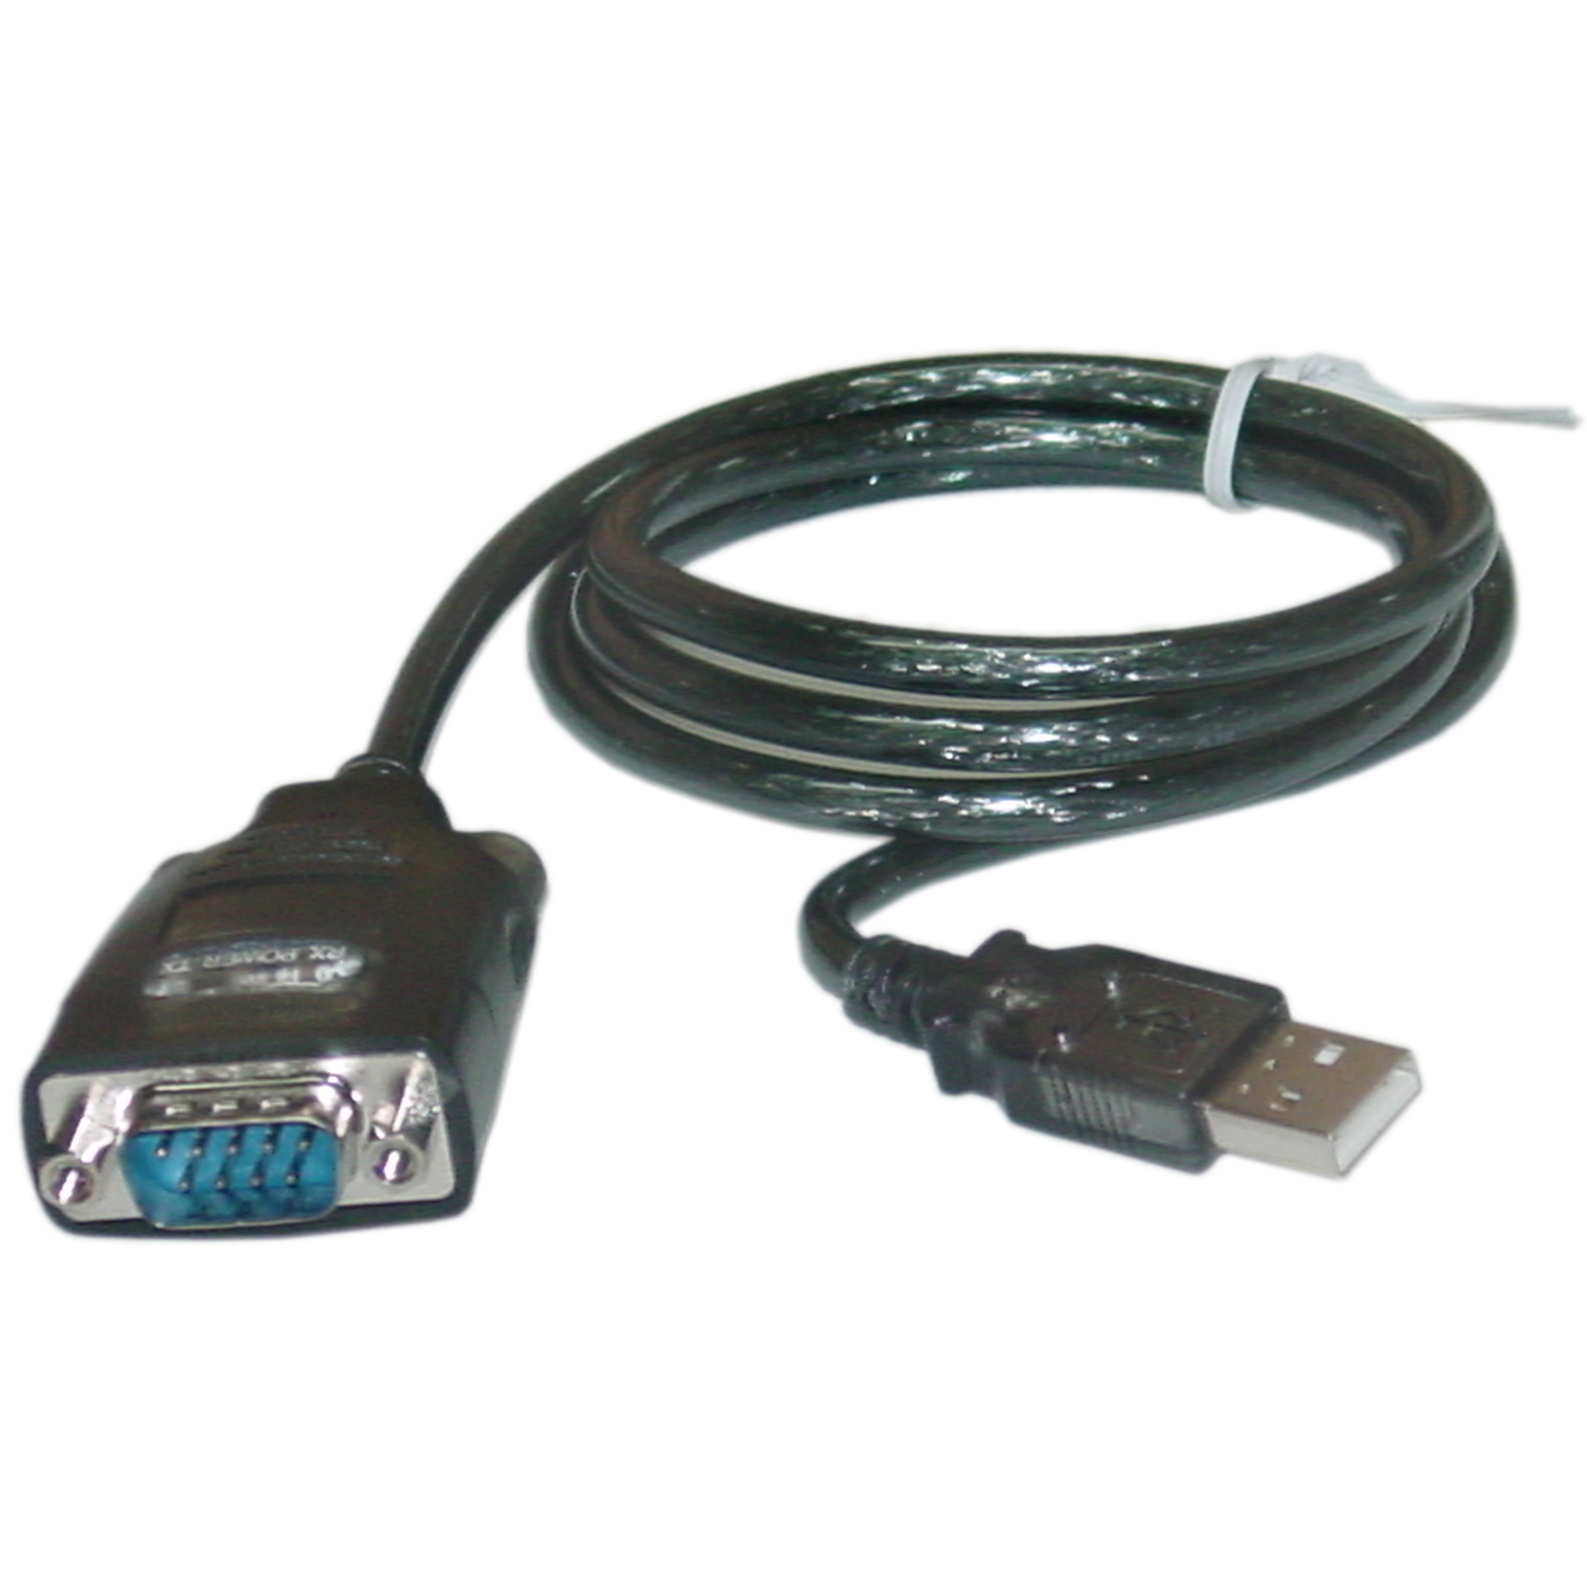 usb to serial connector